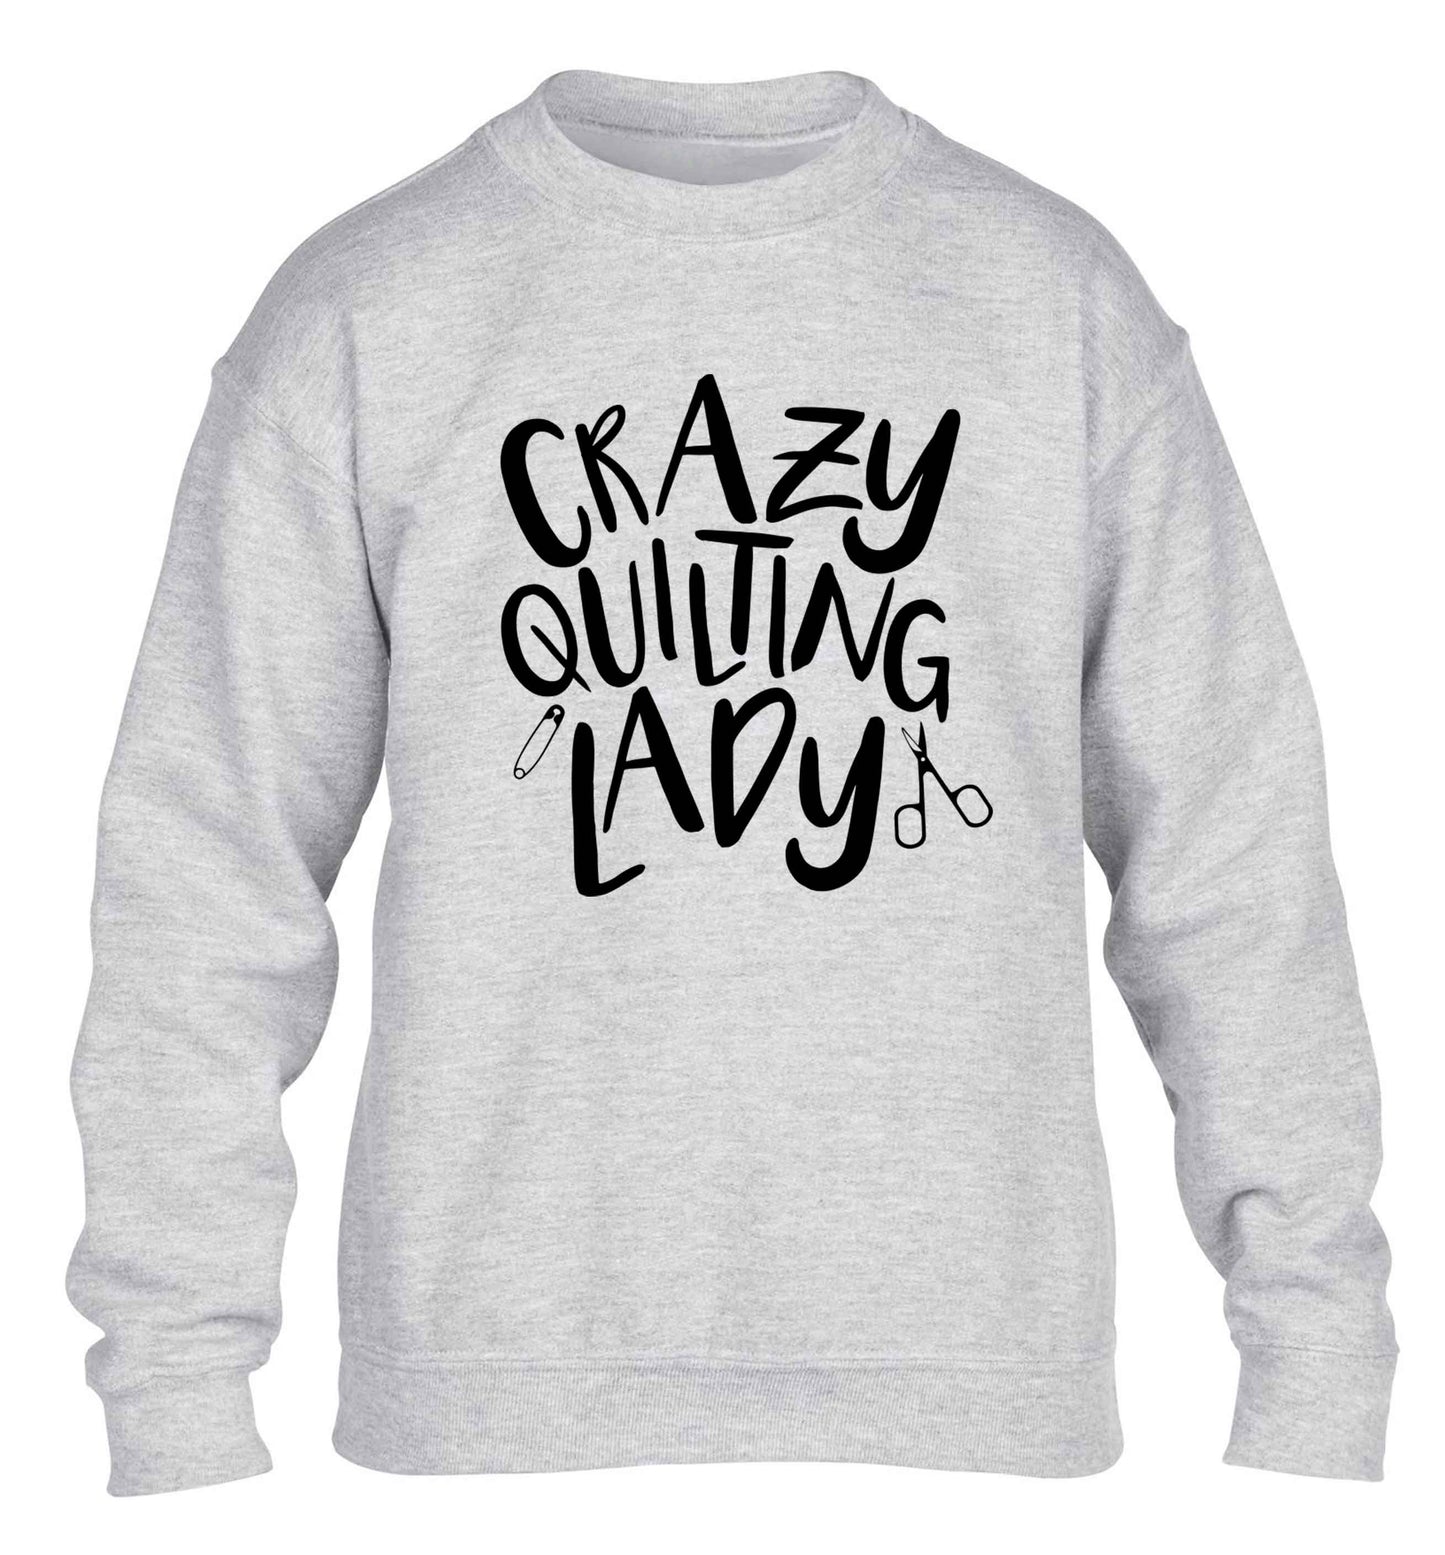 Crazy quilting lady children's grey sweater 12-13 Years